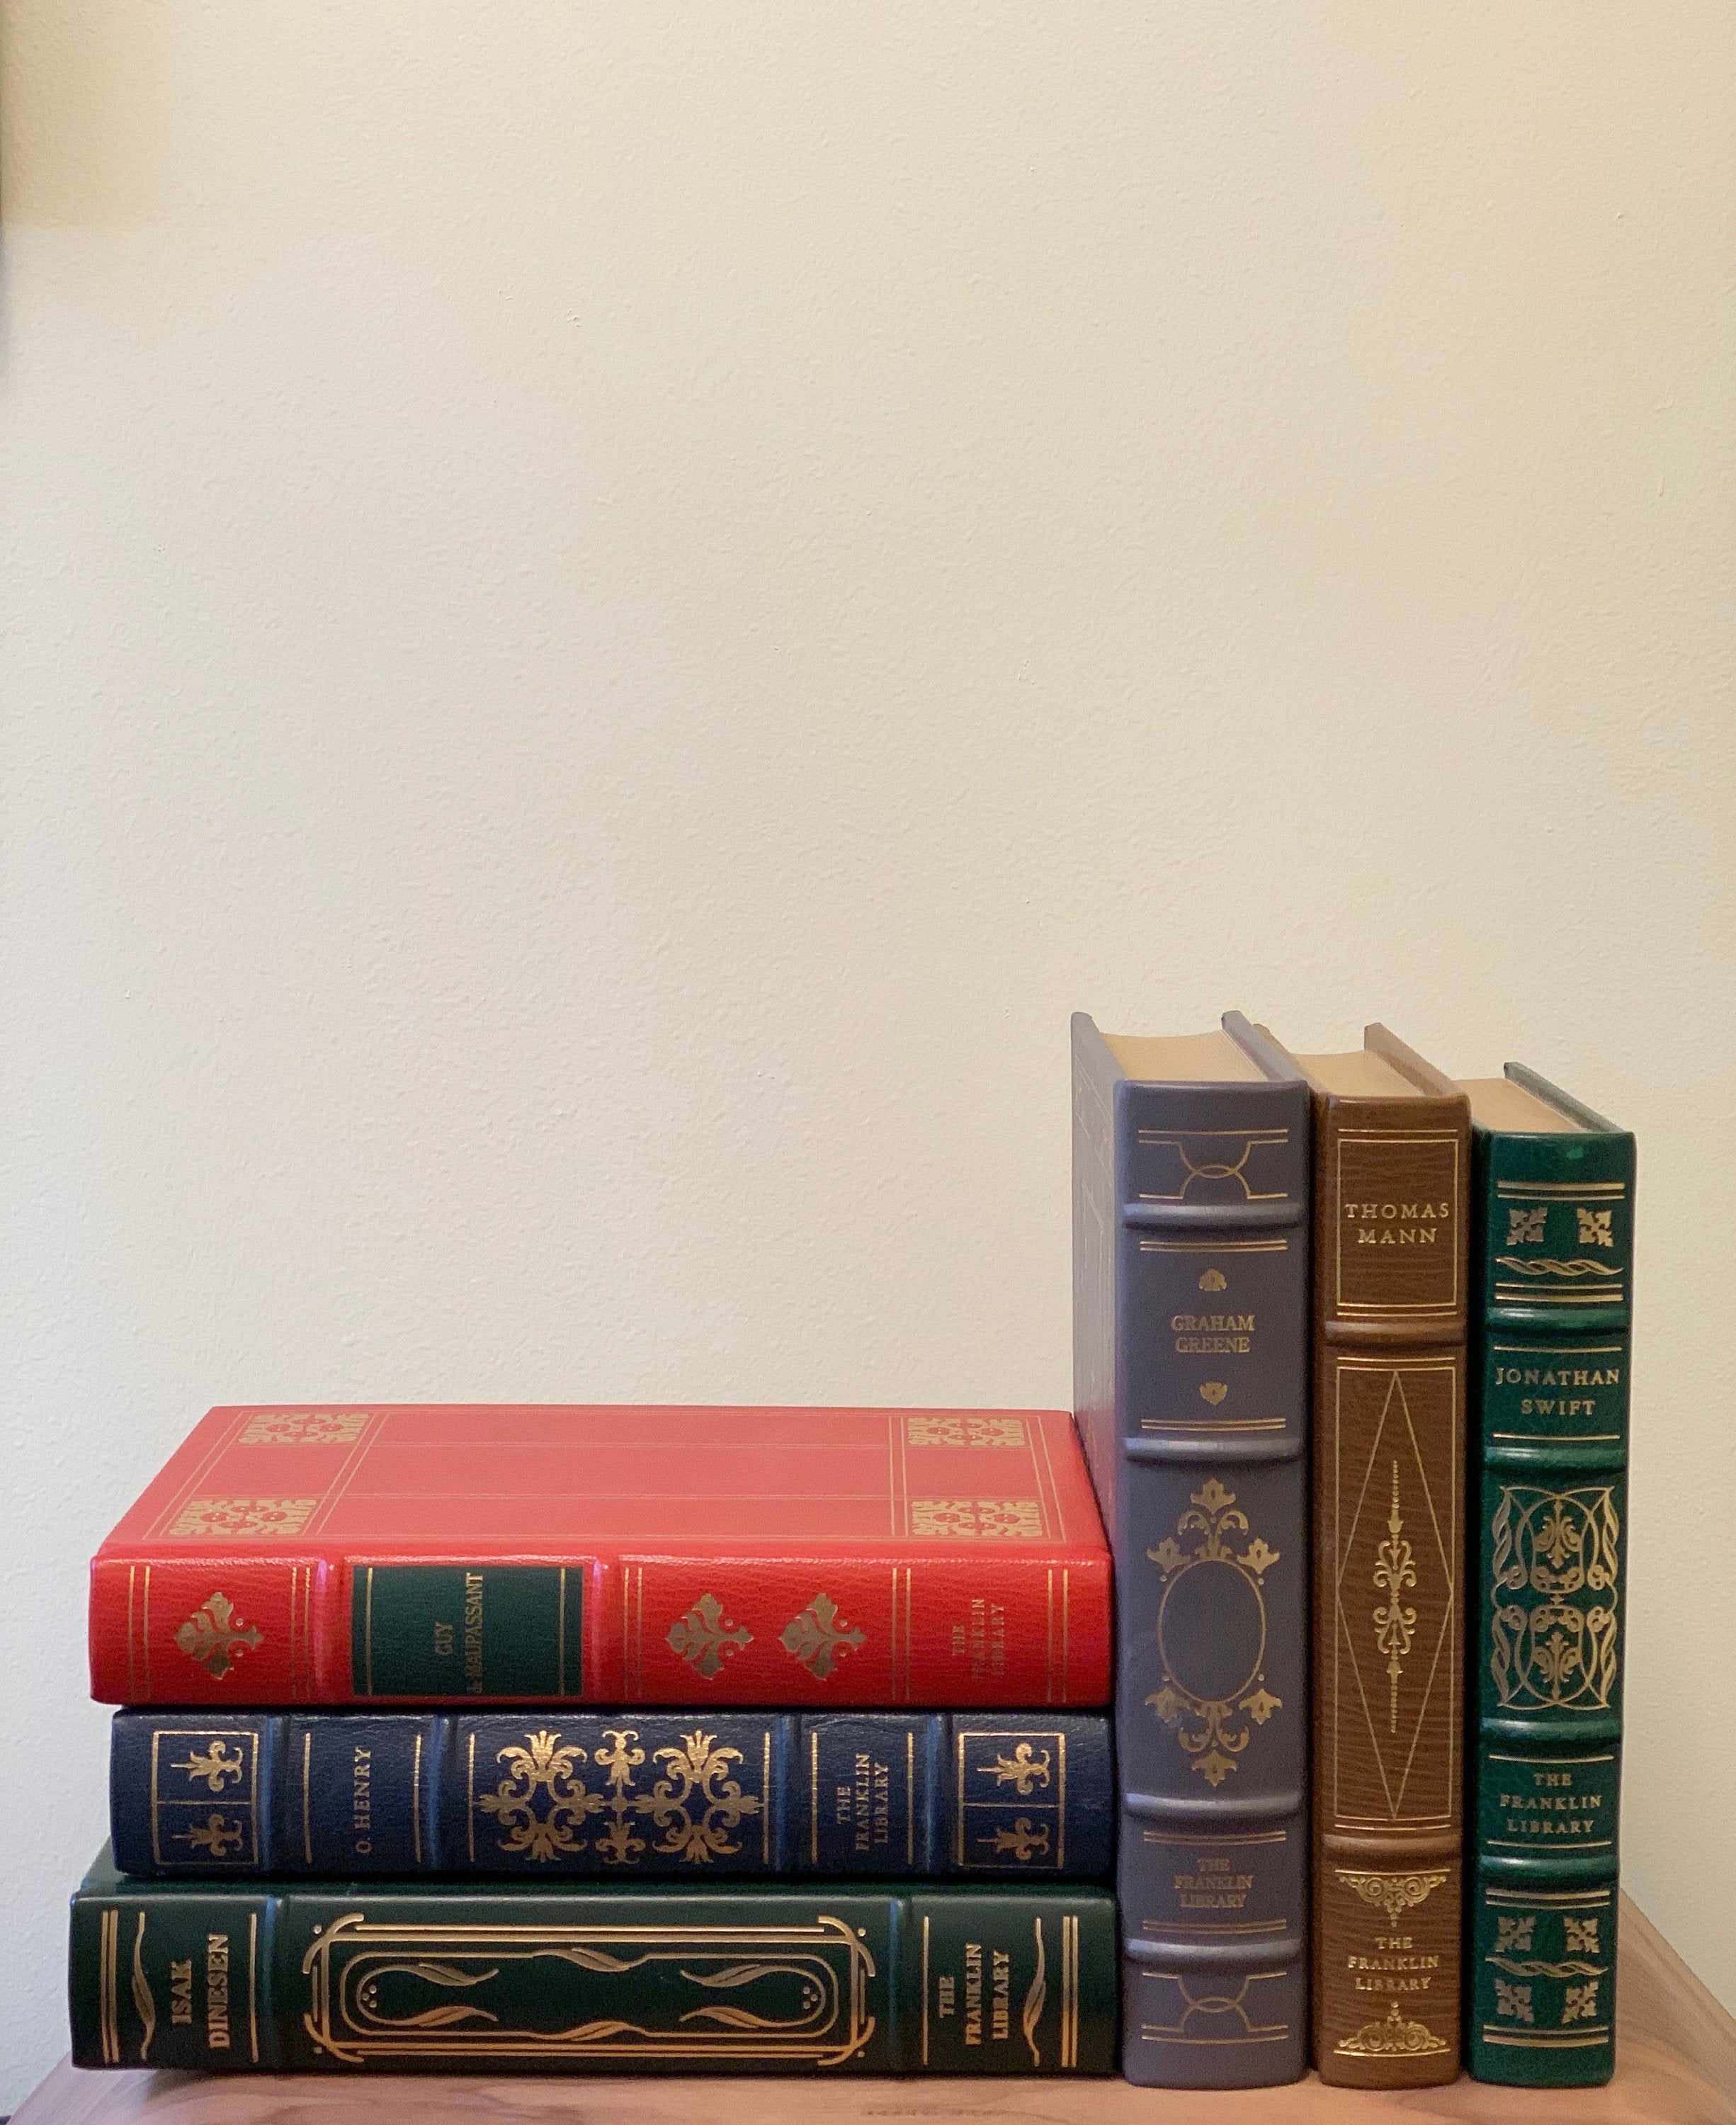 Set of 6 Classic Books The Franklin Library Limited Edition Titles from the Collected Stories of the World's Greatest Writers Series